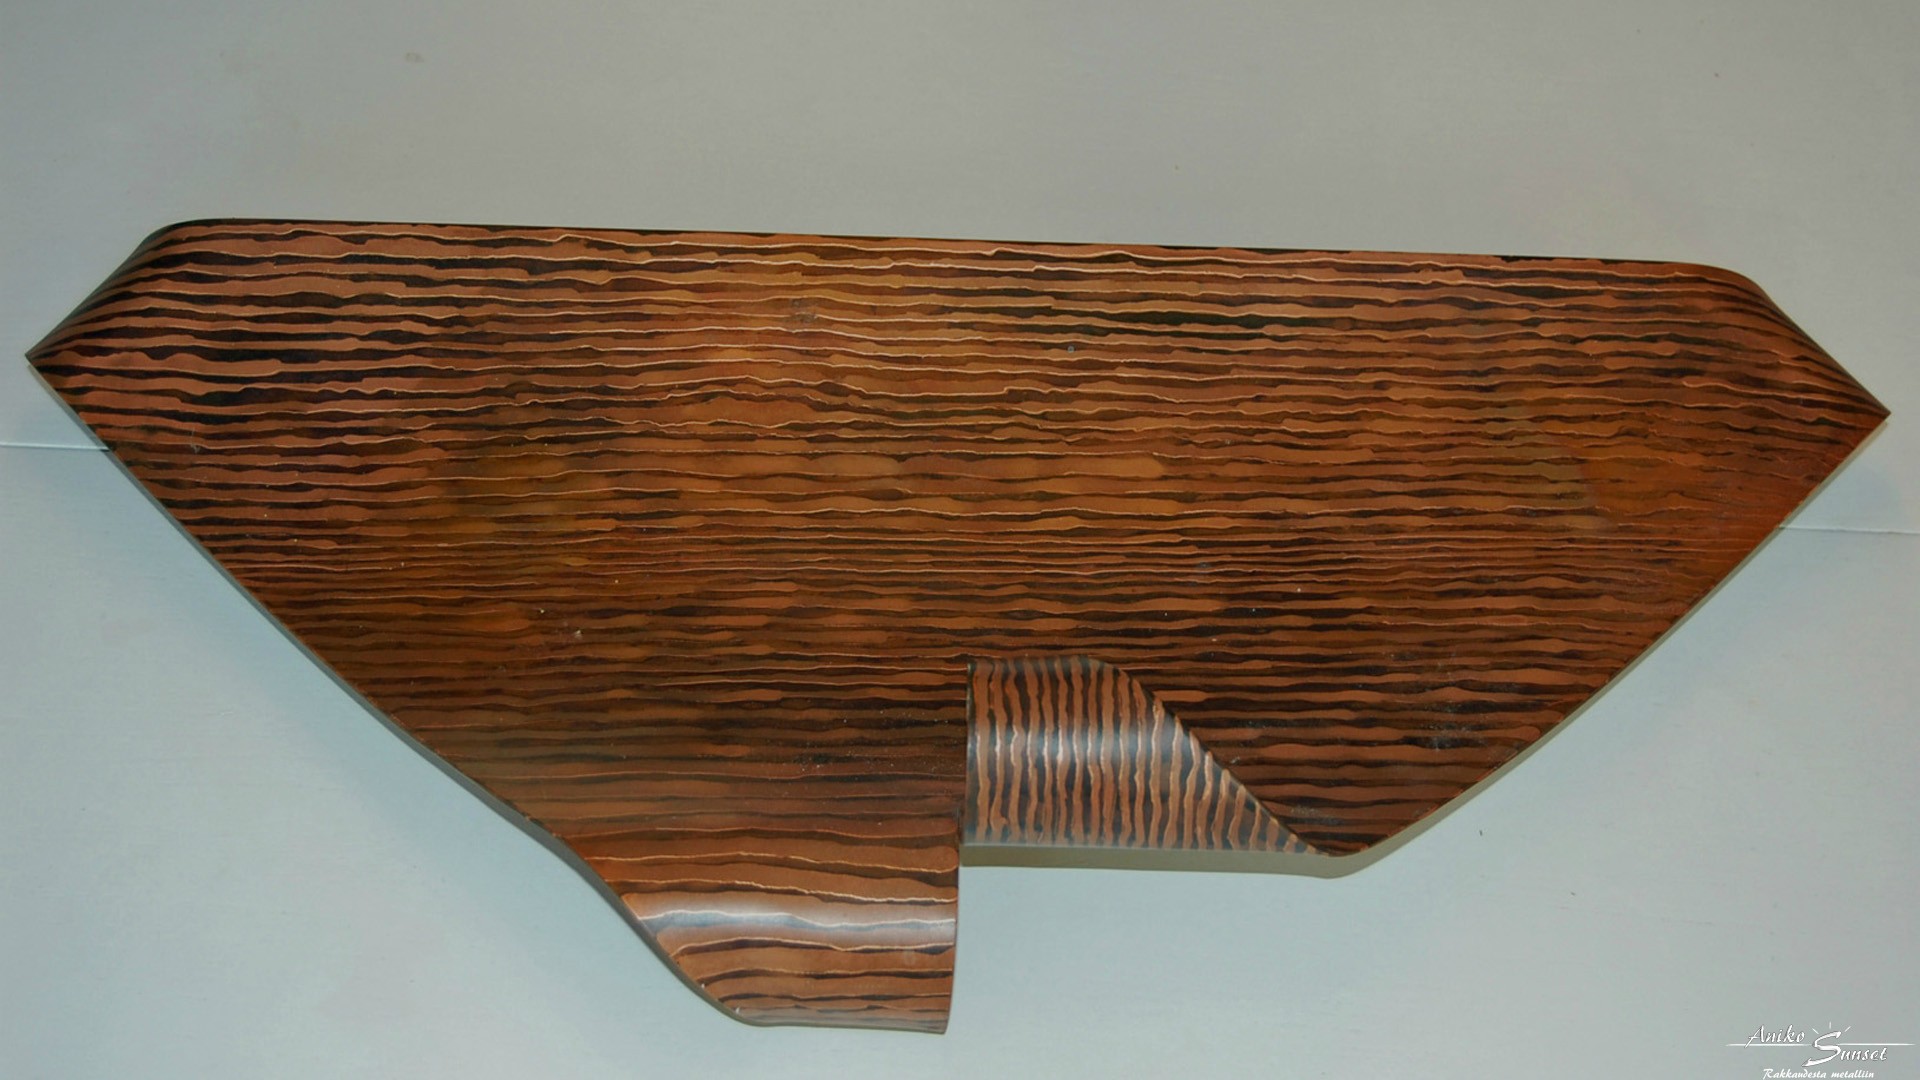 Platter "Ray" - 2 mm copper sheet patinated using a special technique, 580x260 mm